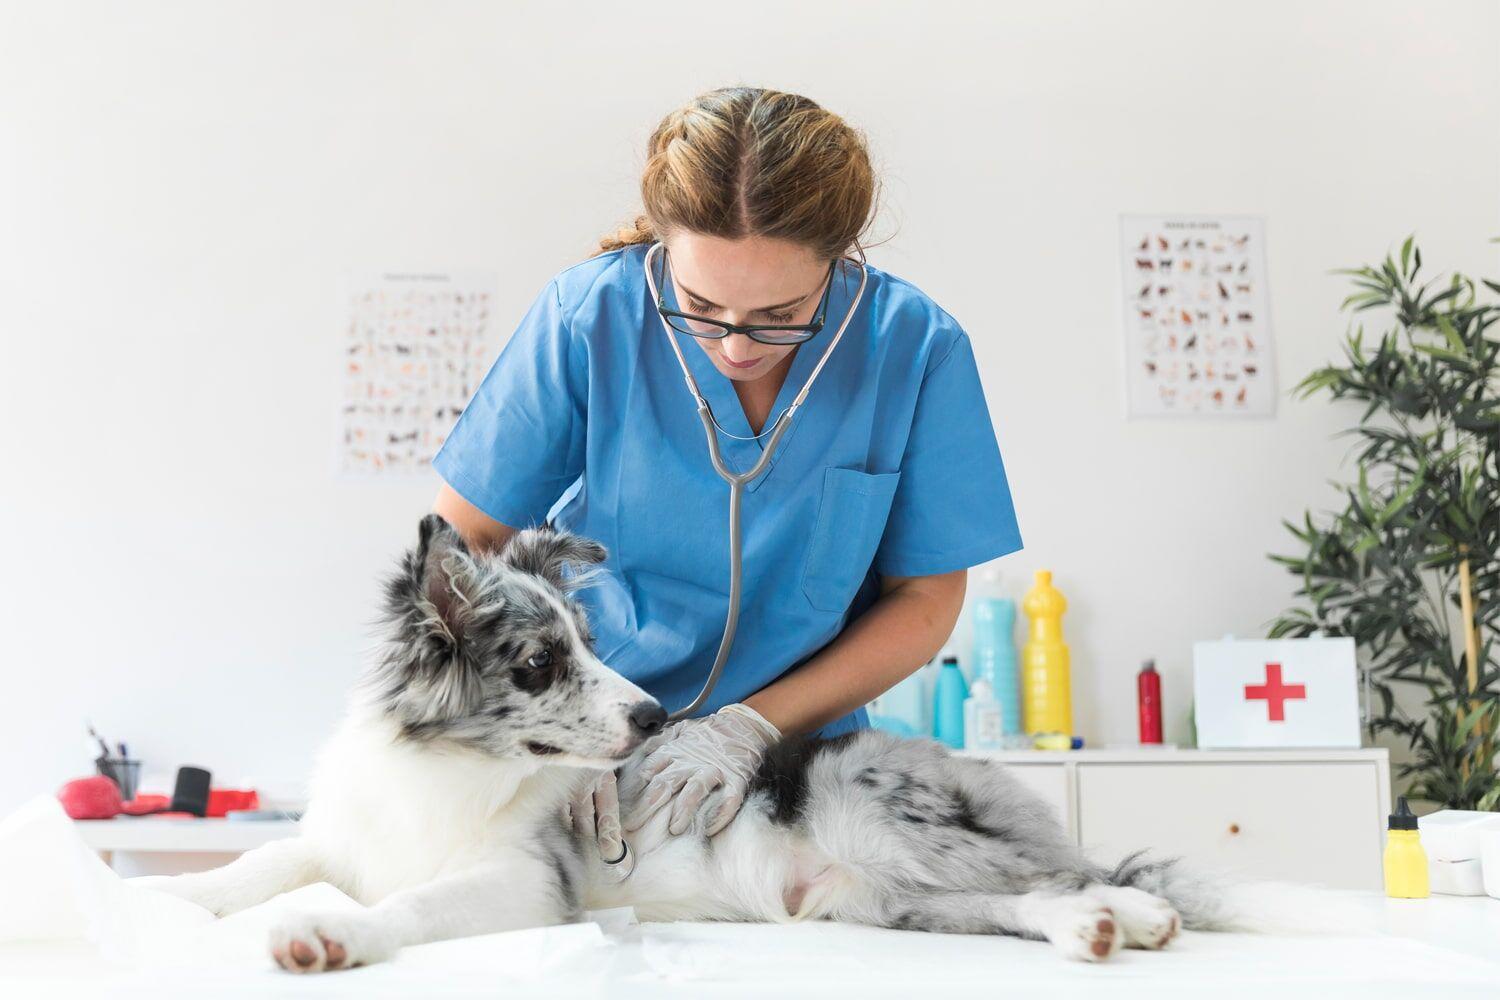 Pet Care 101: Essential Tips for Keeping Your Companion Happy and Healthy